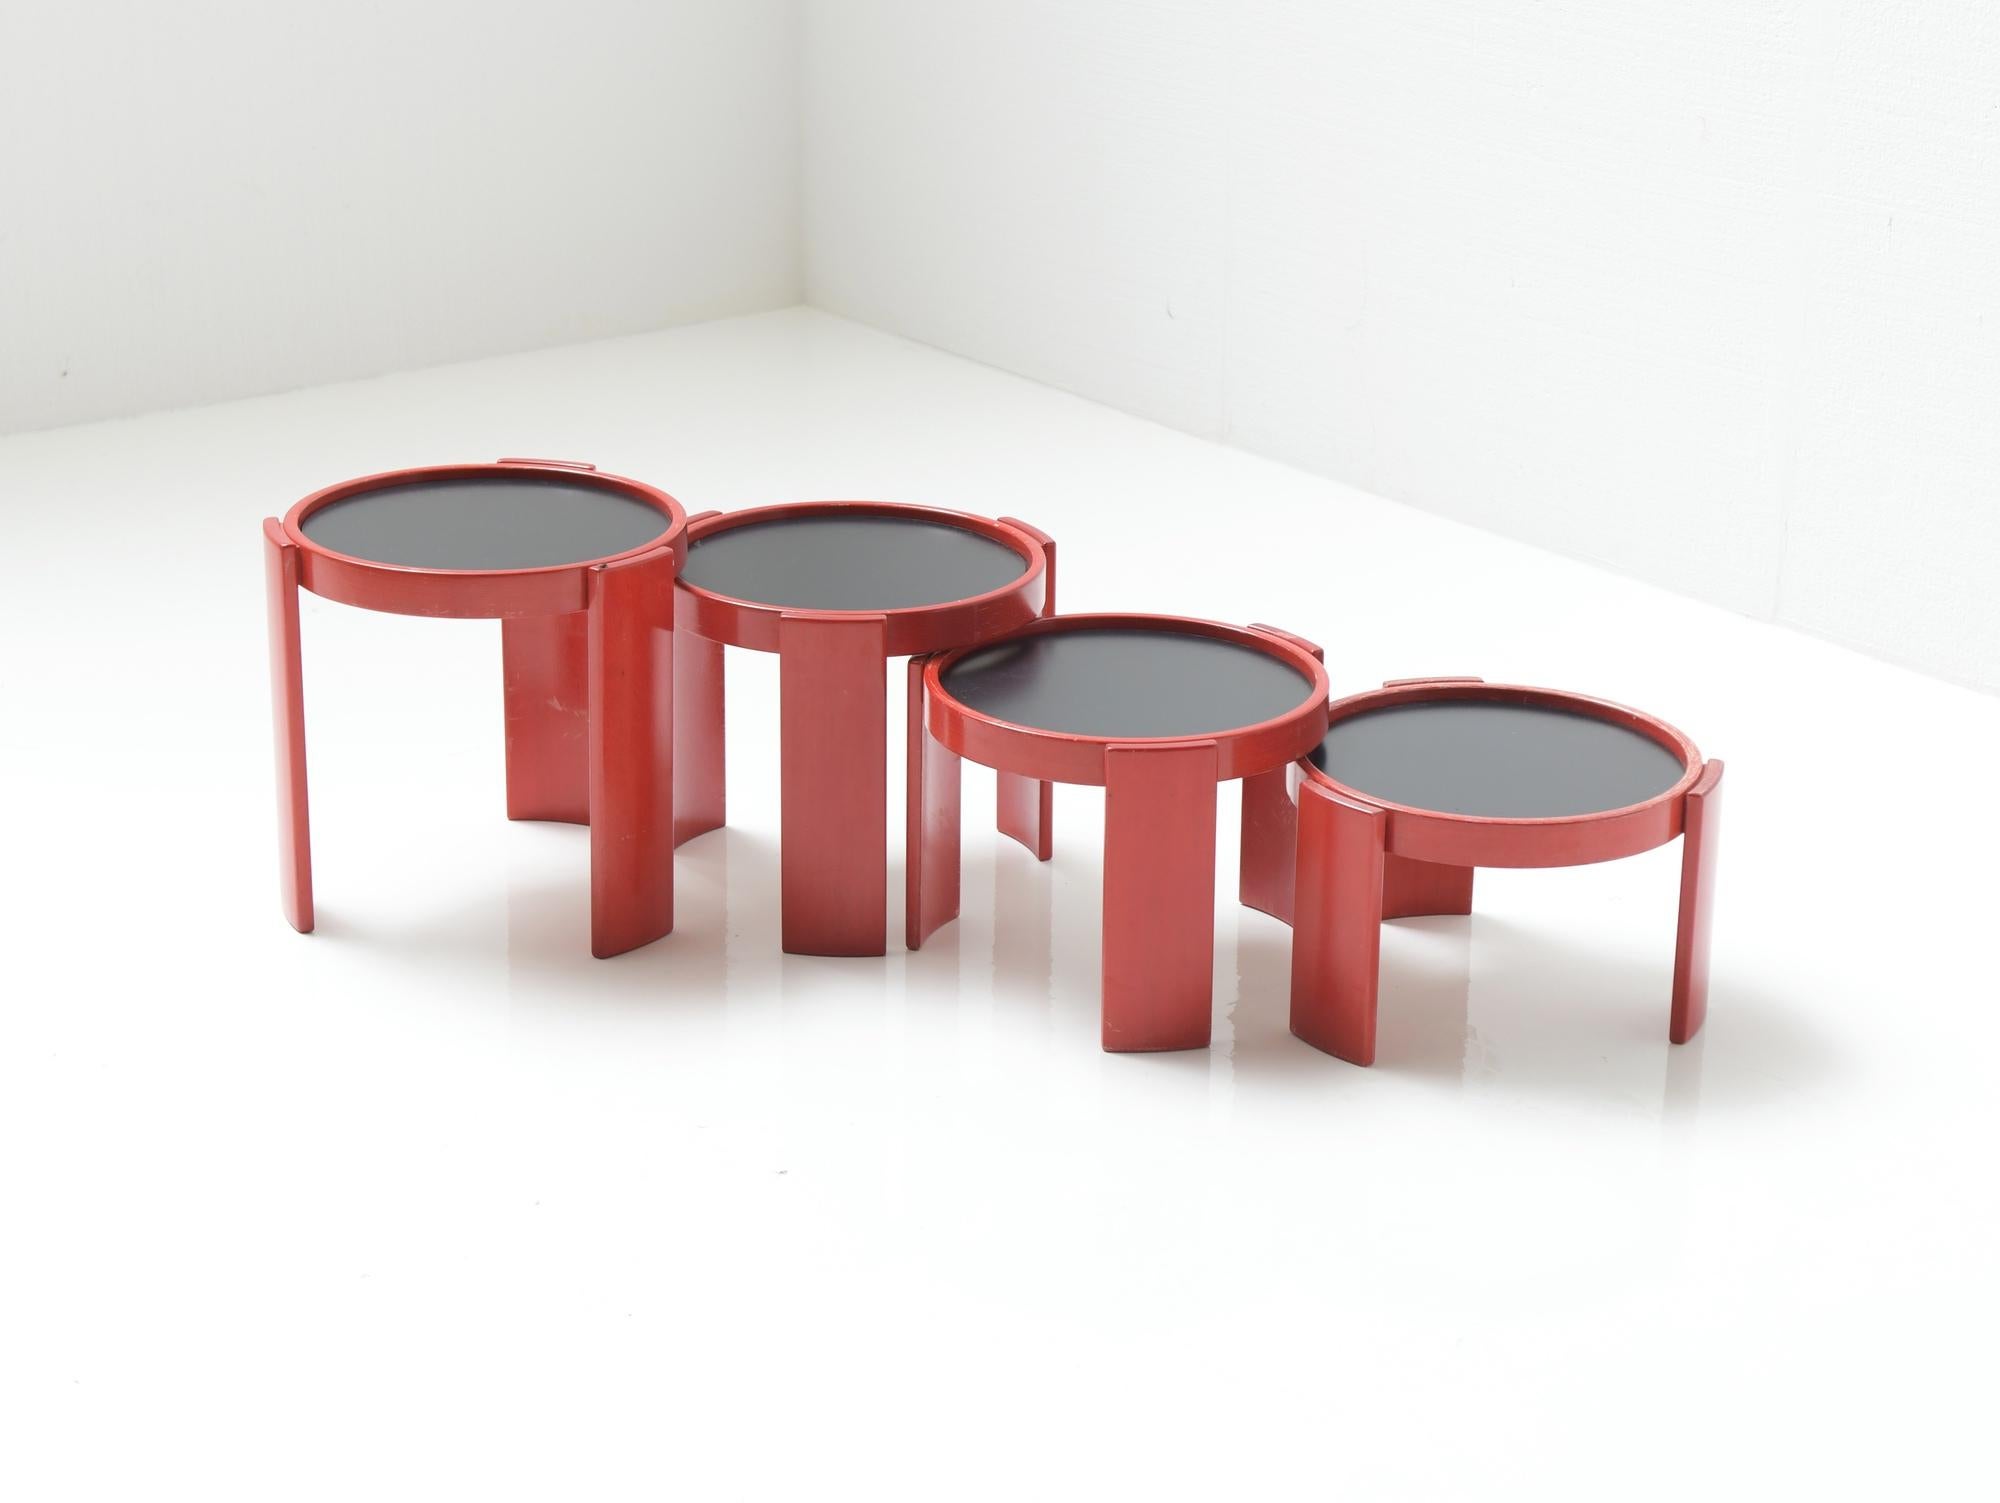 Stunning nesting tables (model 780) by Gianfranco Frattini for Cassina, 1960s.
Still 100% original in a very rare red color.

The 4 pieces have their CASSINA label.

Only sold as a set.

Dimensions :
w42 x h39 cm